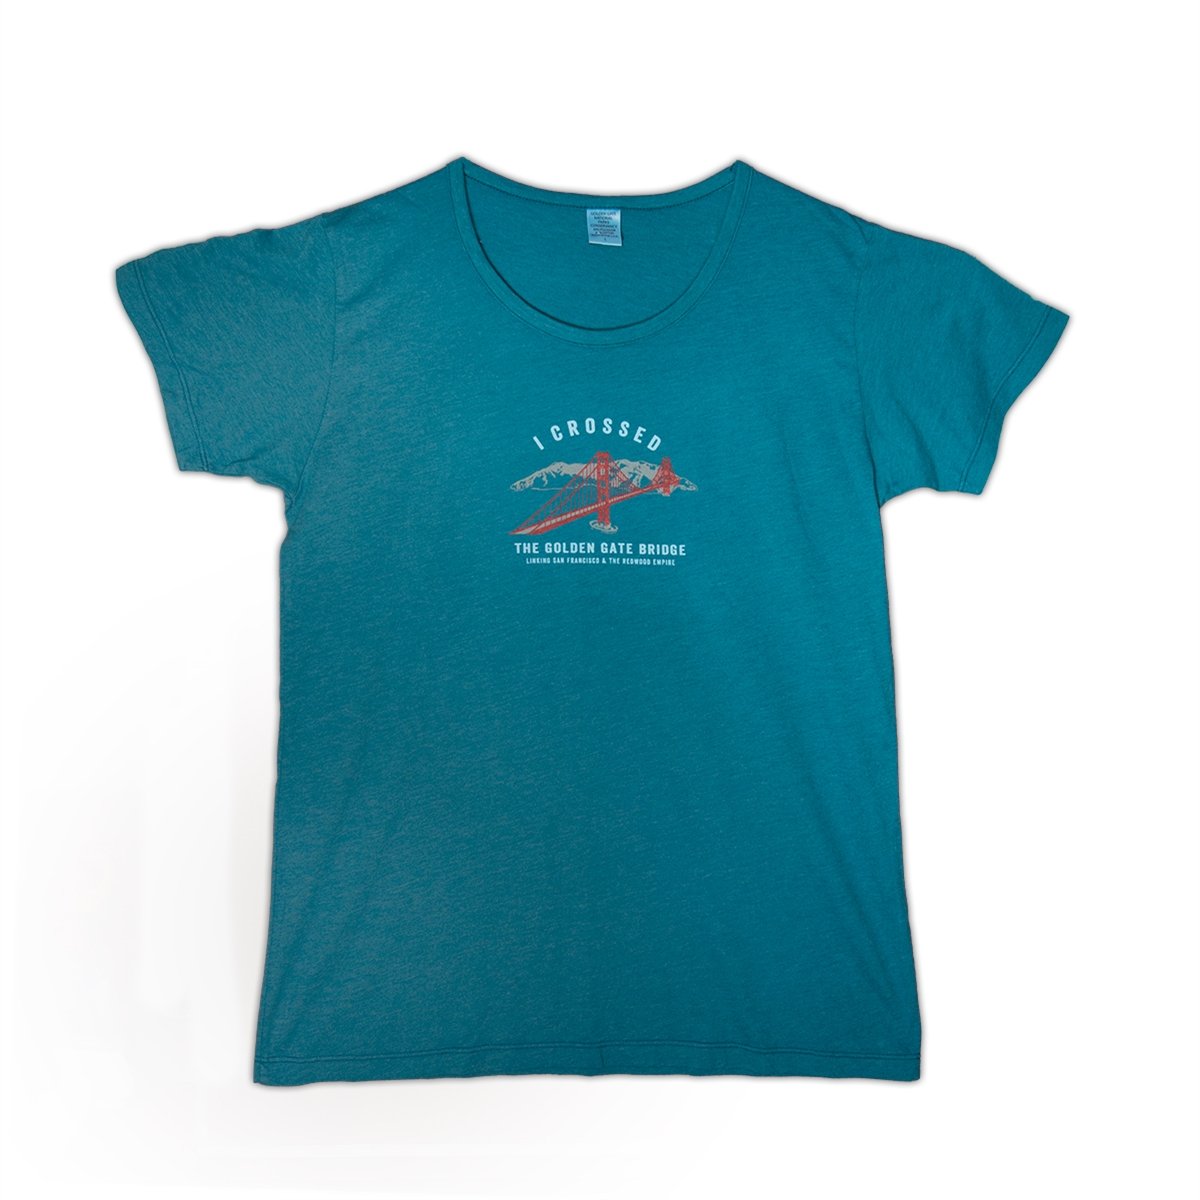 Blue women's t-shirt with red, white, and grey I Crossed the Golden Gate Bridge screen-printed design on chest.